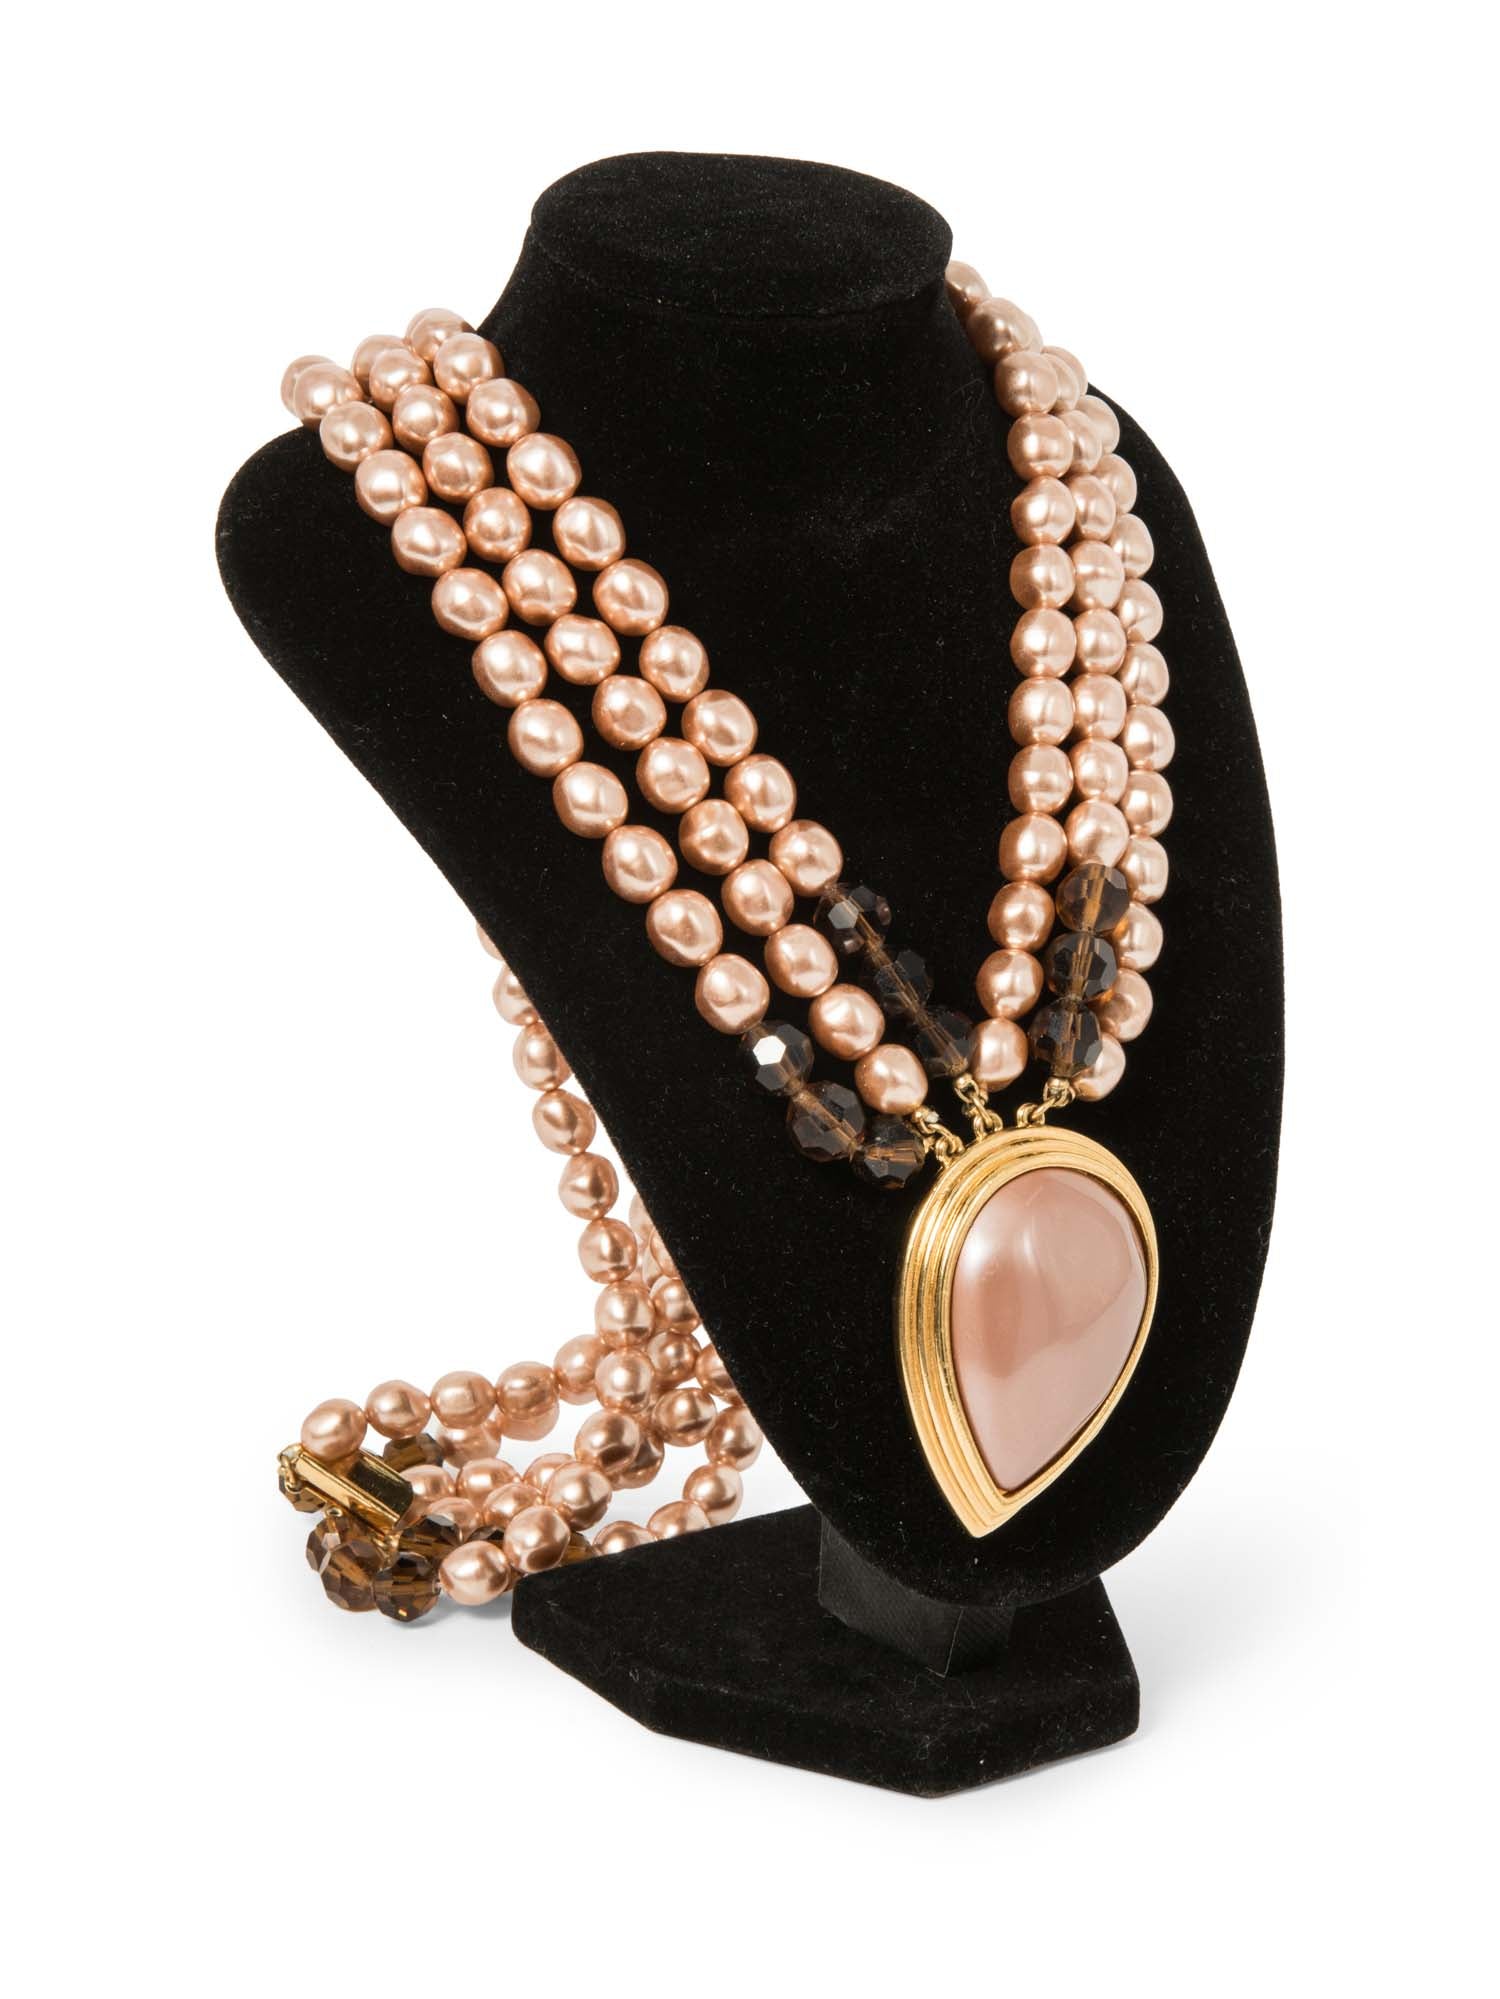 Yves Saint Laurent Stamped Vintage Layered Pearl Necklace Rose Gold